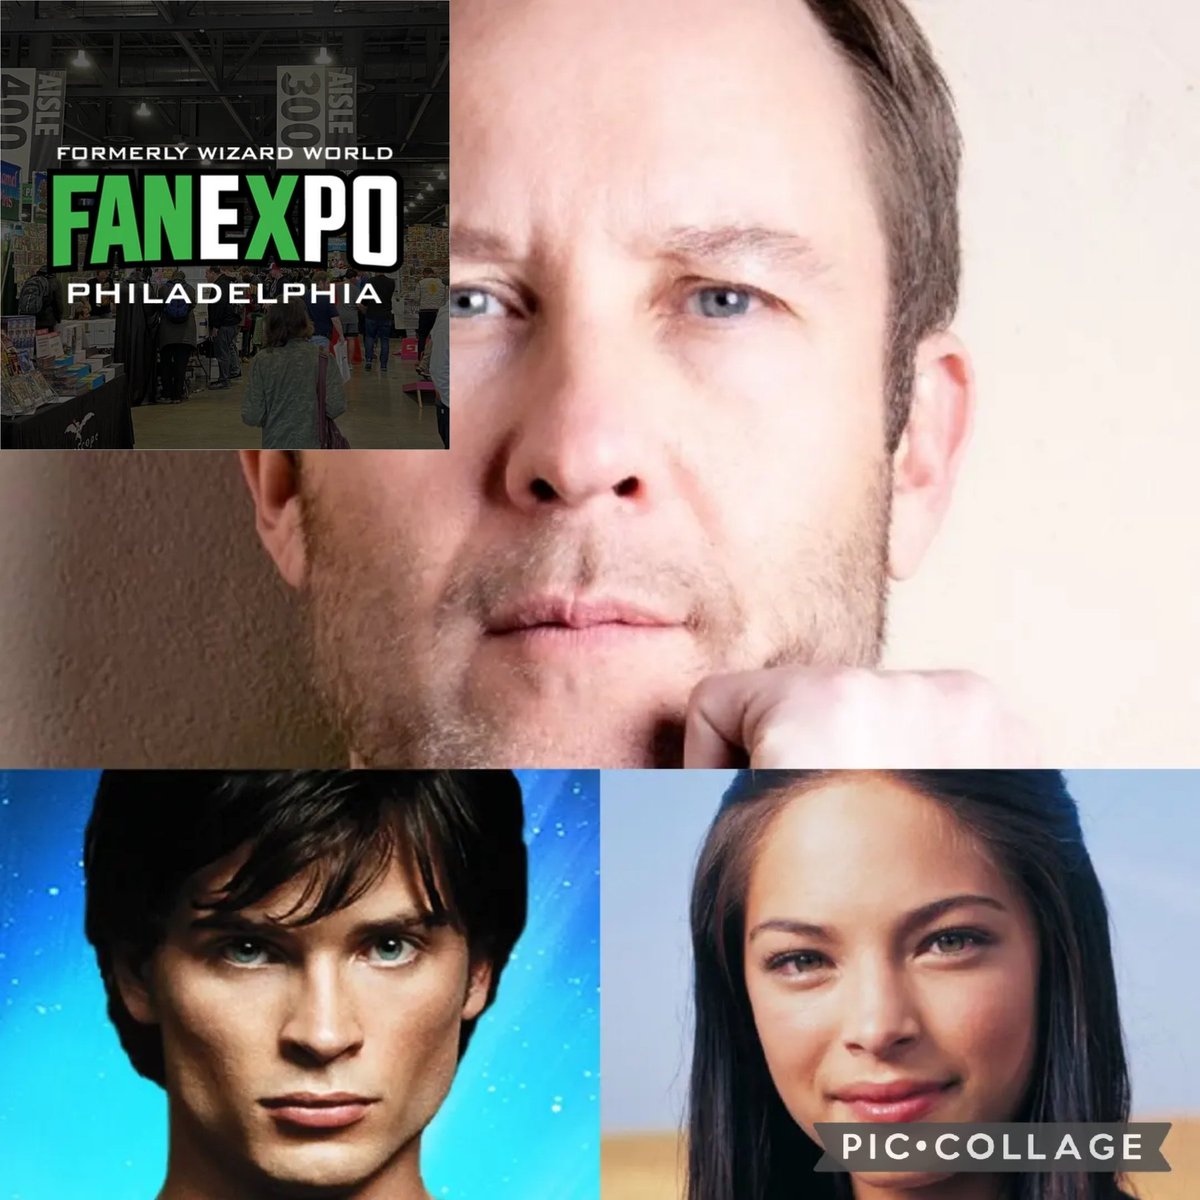 Another Smallville con is happening in my home state of Pennsylvania. @michaelrosenbum, #TomWelling and @MsKristinKreuk will be at @fanexpophilidelphia from June 2nd-4th.😀🙏